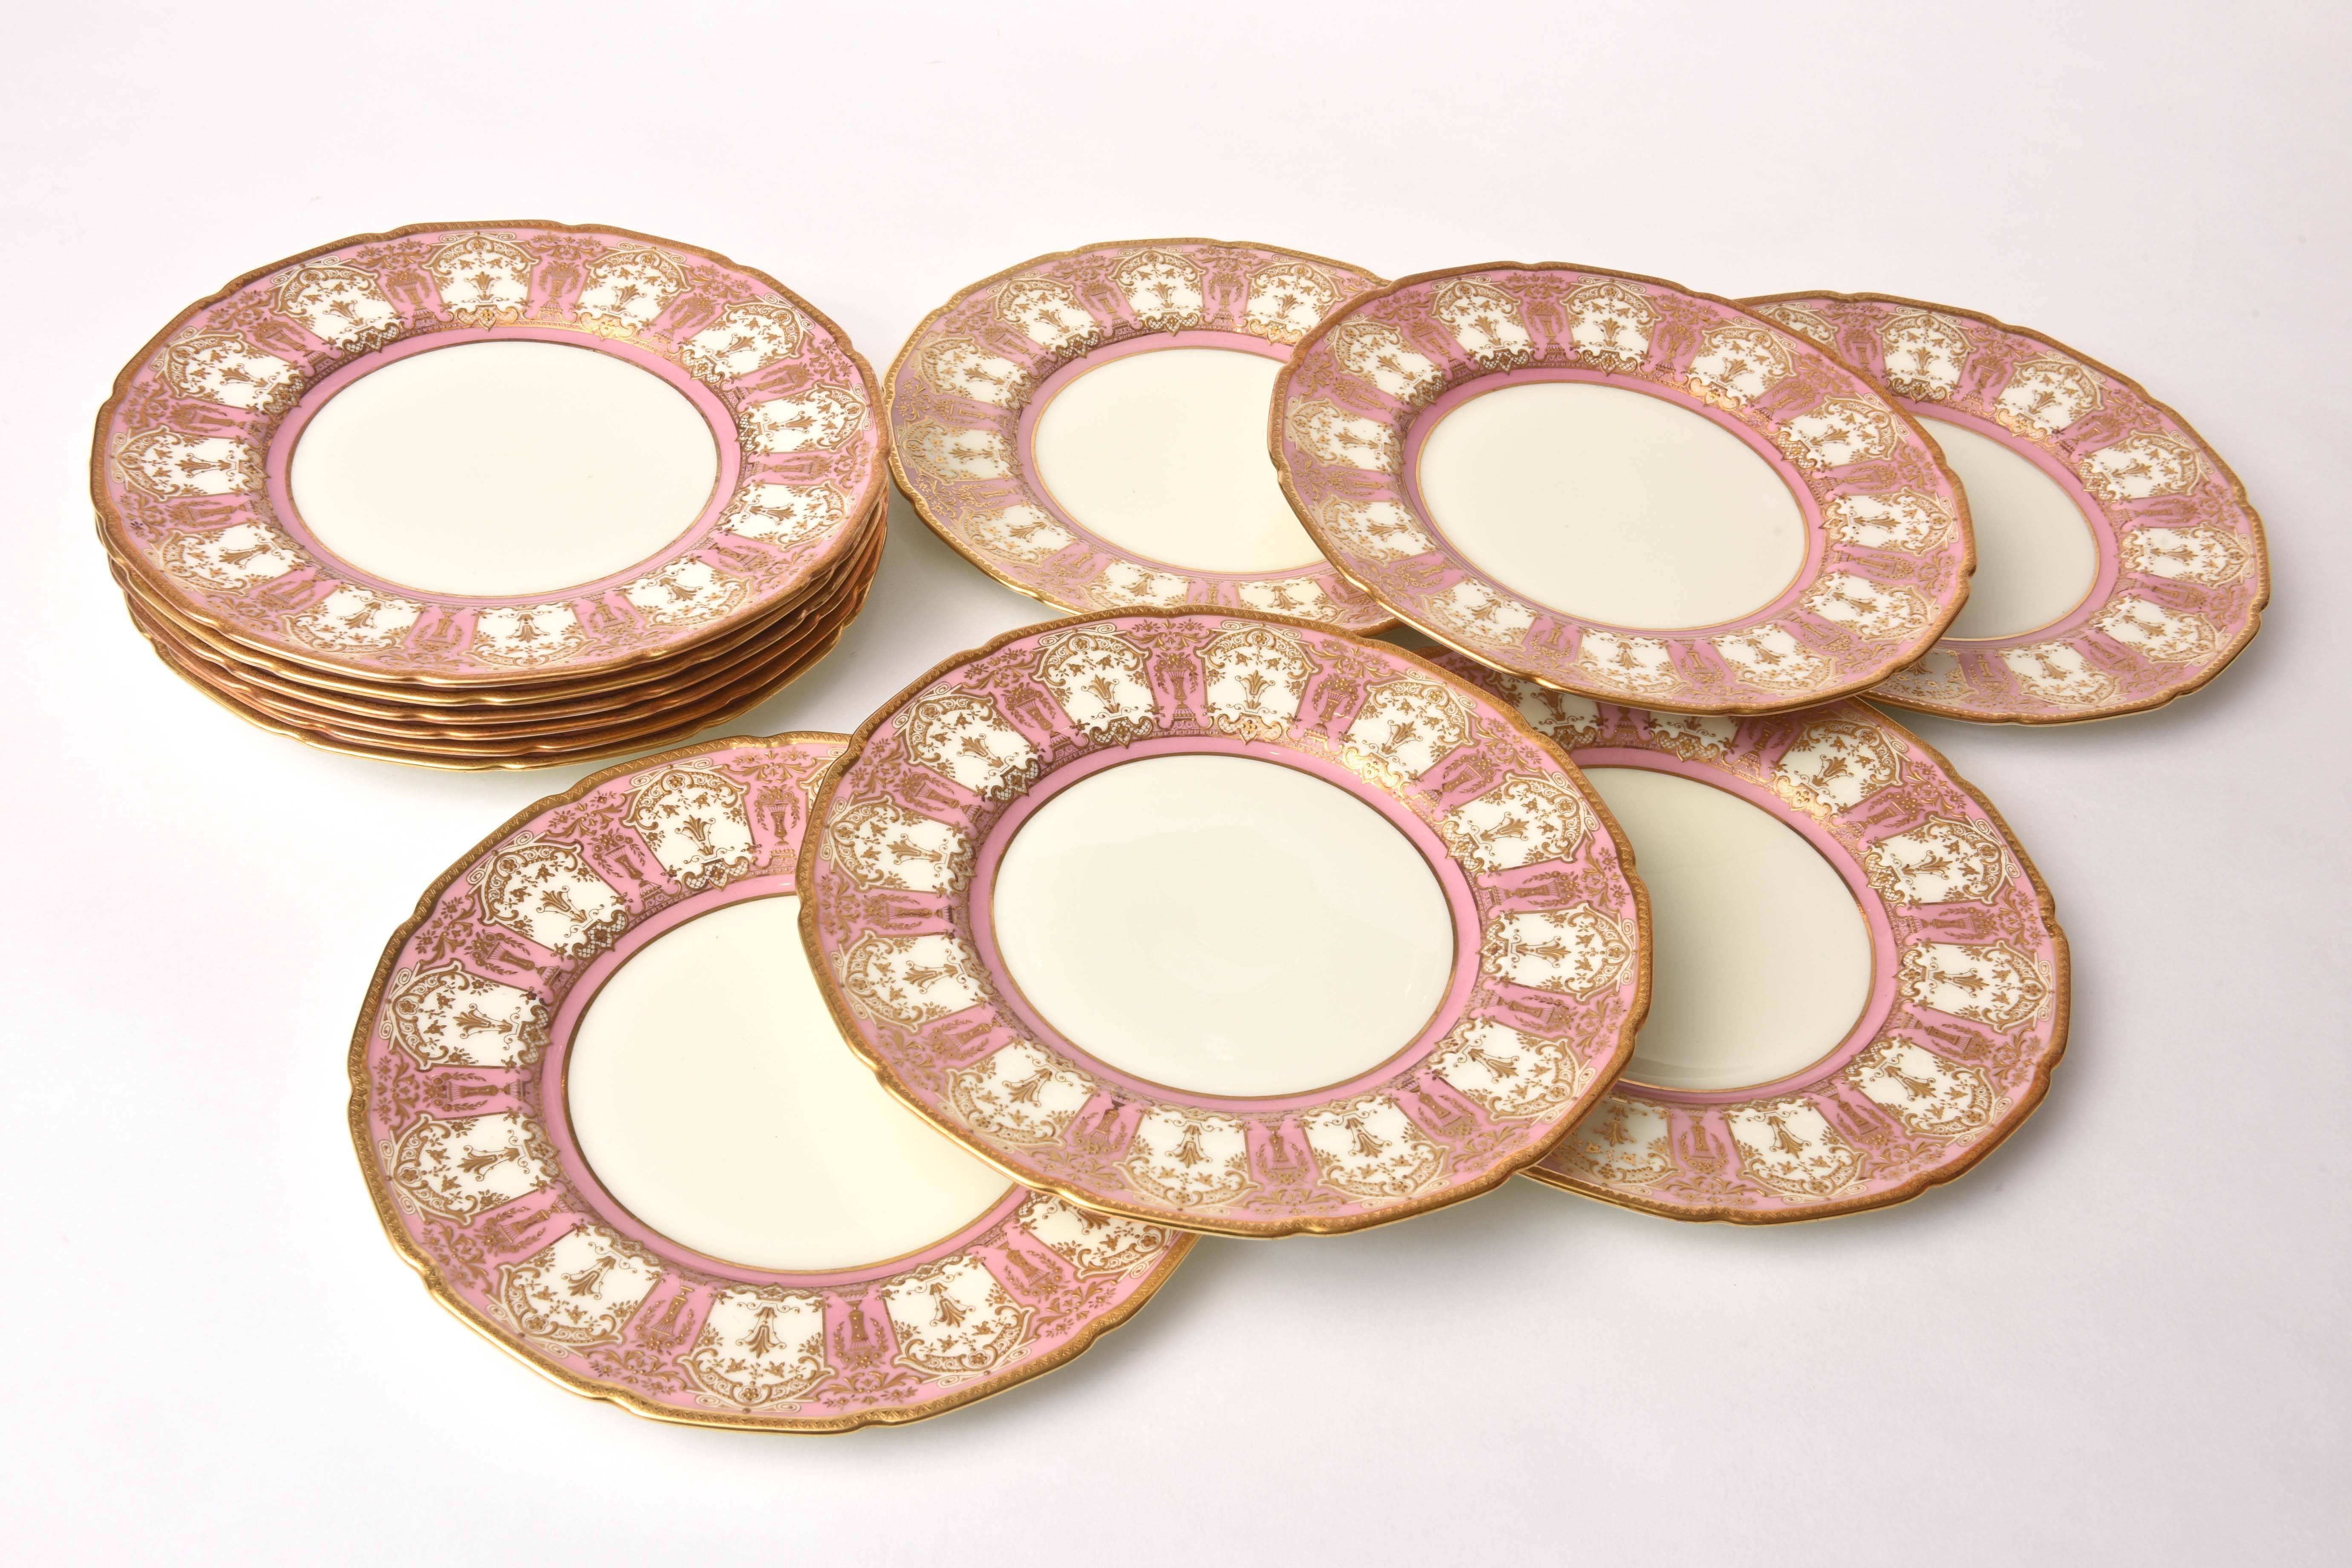 Hand-Crafted 12 Exquisite Pink and Heavily Gilded Dessert or Salad Plates, Antique English